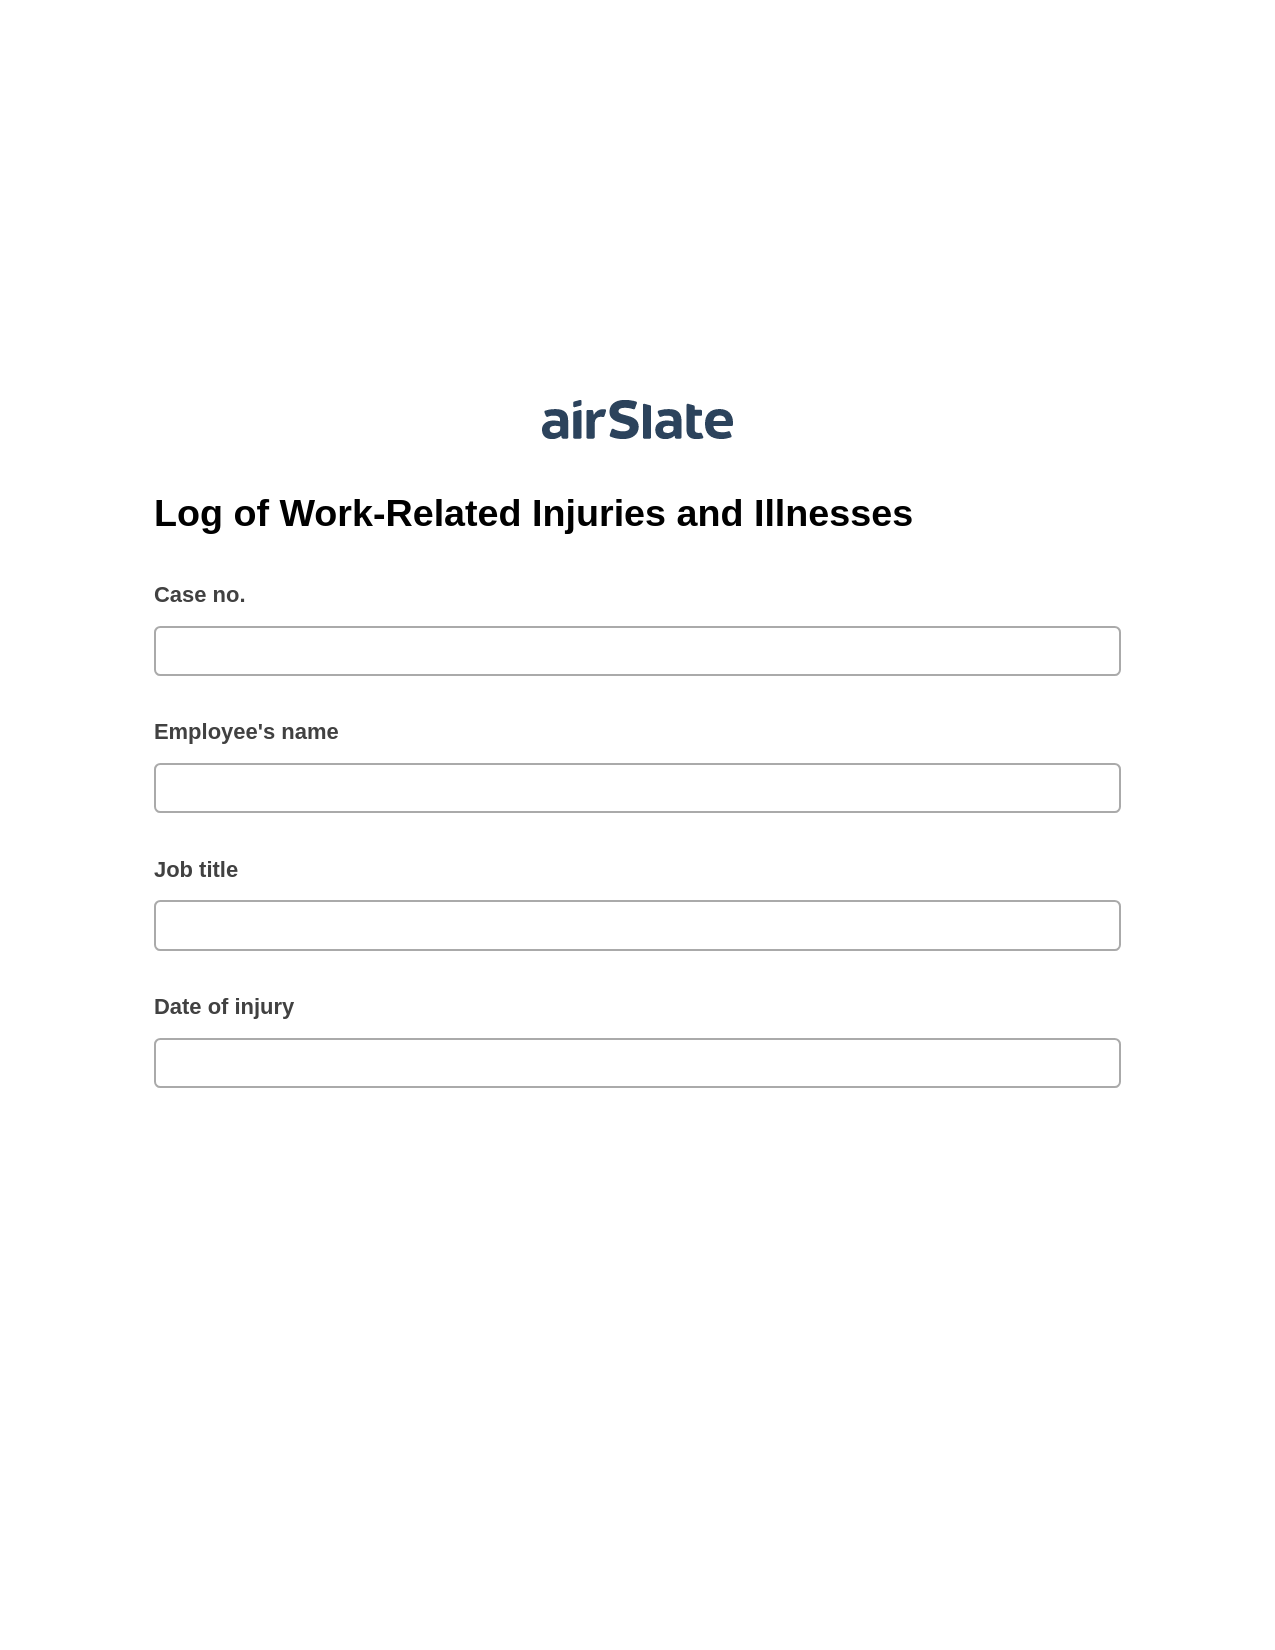 Multirole Log of Work-Related Injuries and Illnesses Pre-fill Dropdown from Airtable, Update NetSuite Records Bot, Text Message Notification Postfinish Bot